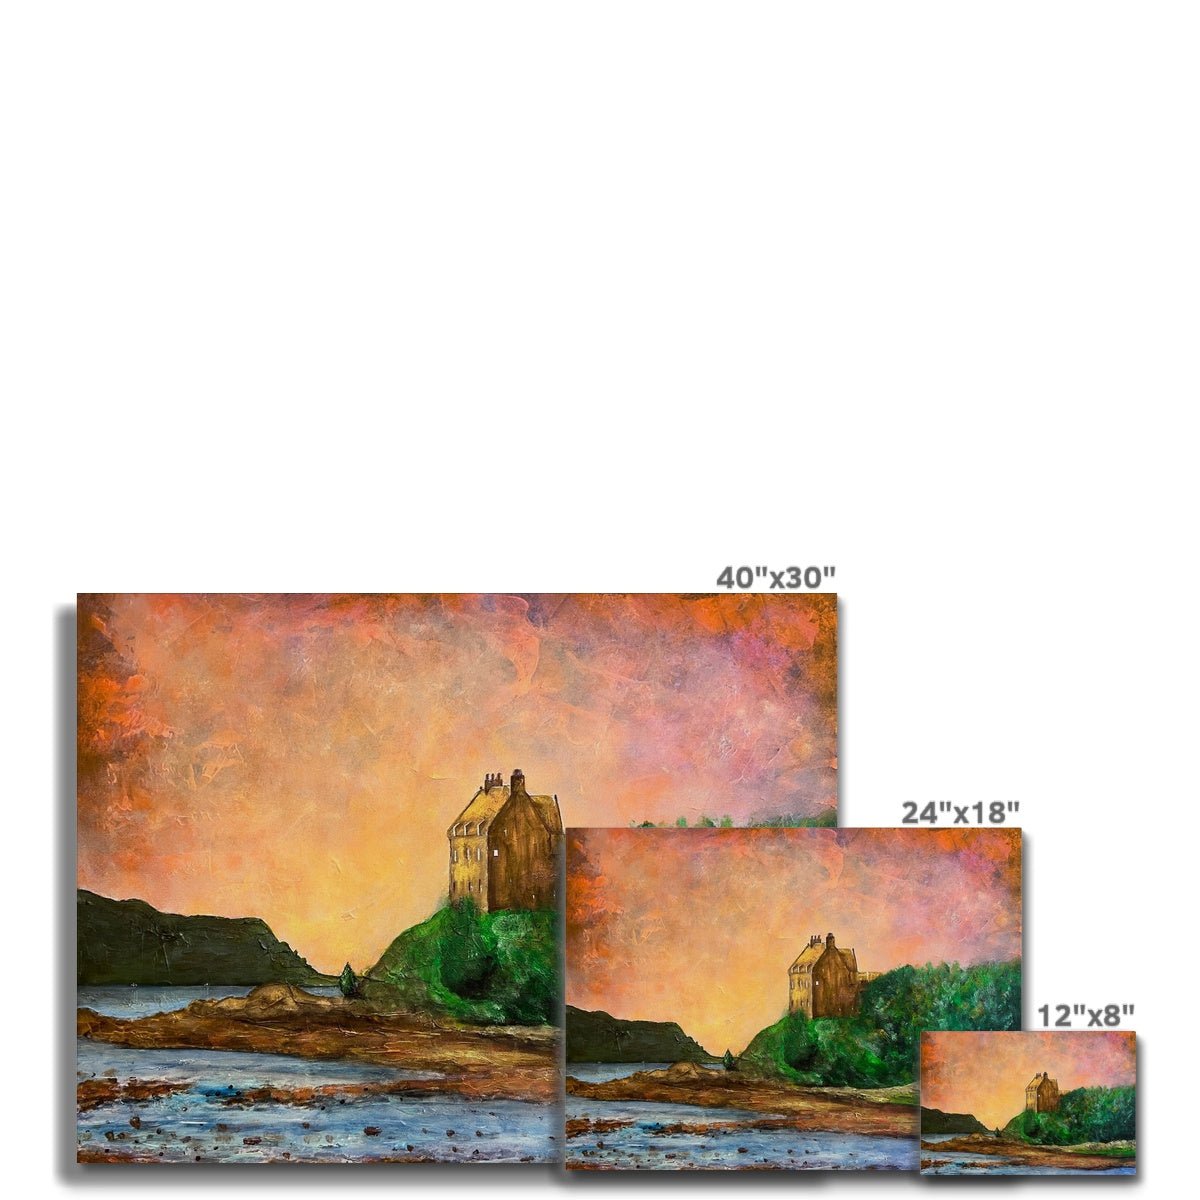 Duntrune Castle Painting | Canvas From Scotland-Contemporary Stretched Canvas Prints-Historic & Iconic Scotland Art Gallery-Paintings, Prints, Homeware, Art Gifts From Scotland By Scottish Artist Kevin Hunter